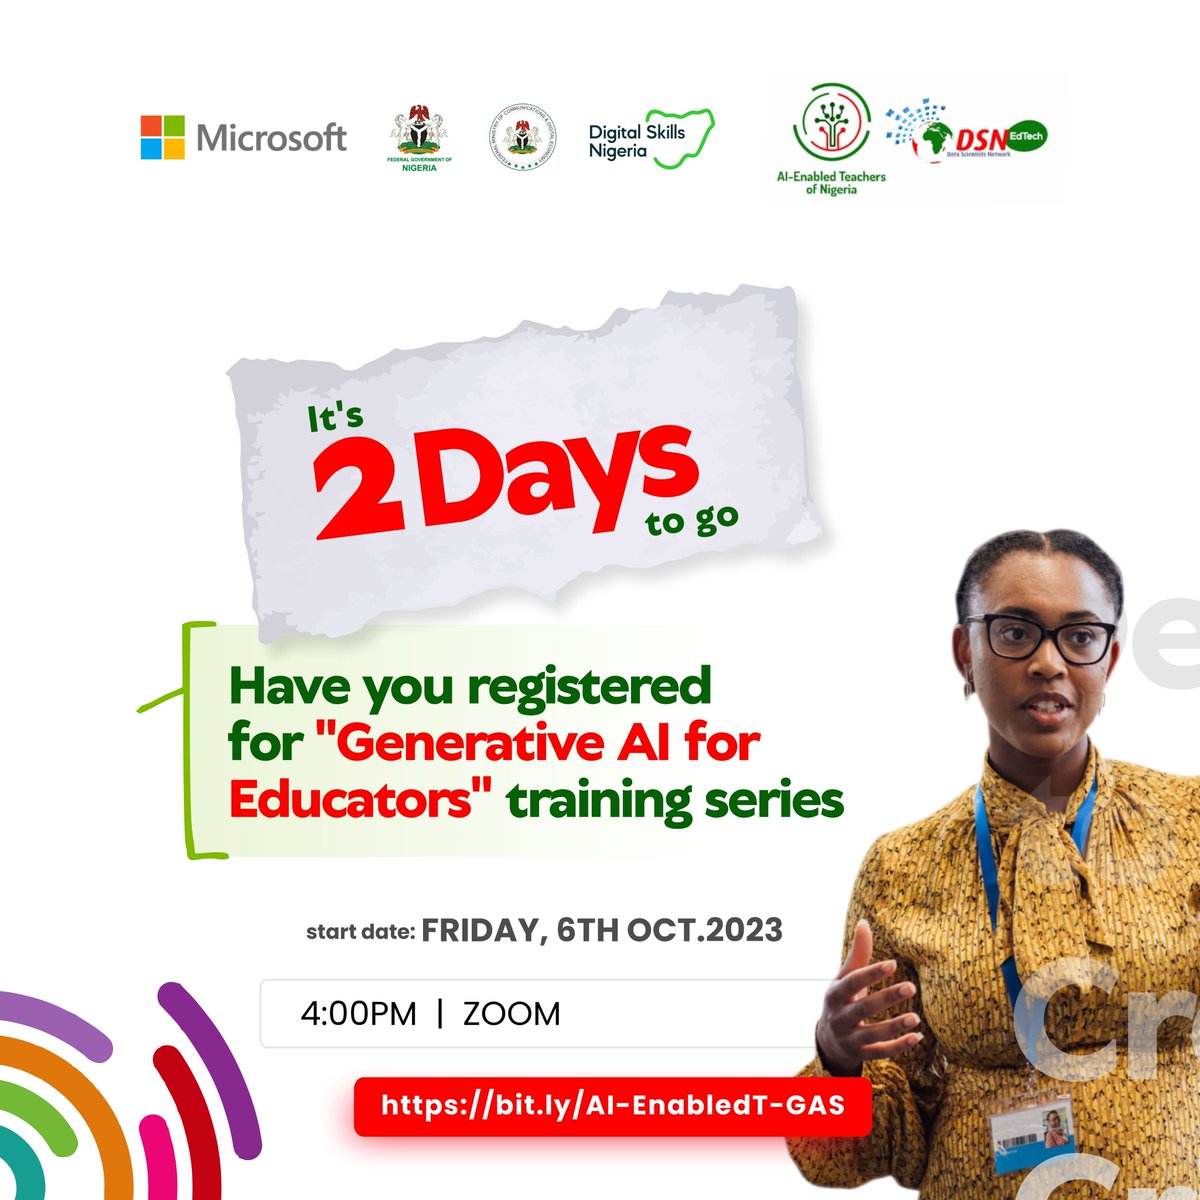 It's just 2 days to go! Seats are filling up fast! Have you registered to become a 21st century teacher? Unlock endless possibilities in the education sector and become a sought-after teacher. Register here to reserve a seat>bit.ly/AI-EnabledT-GAS